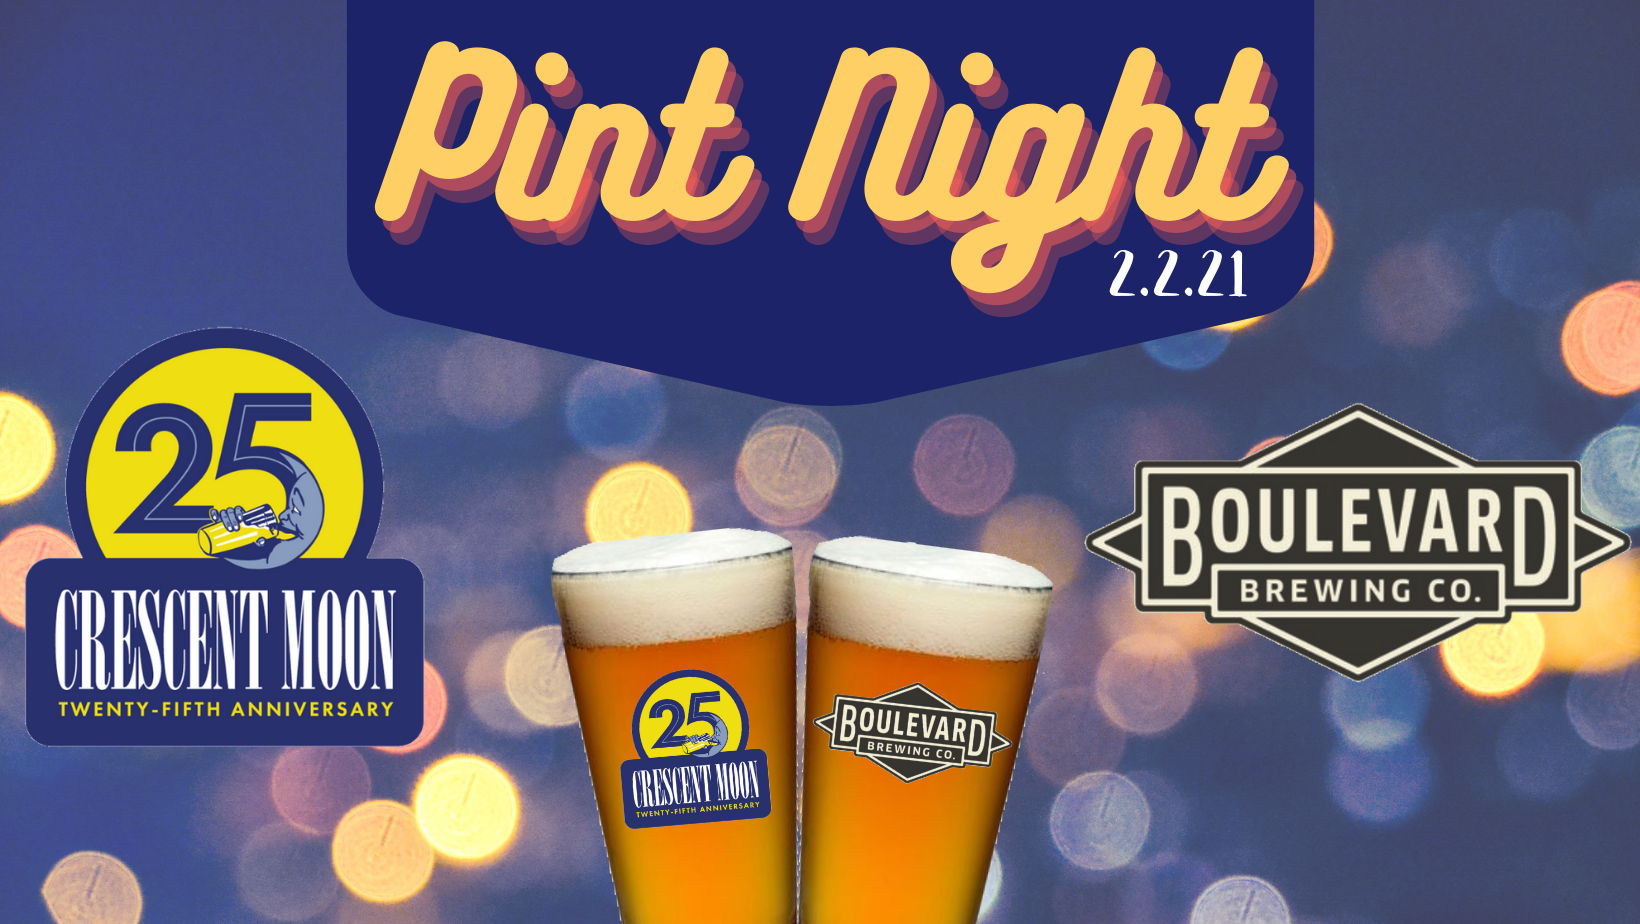 Pint Night with Boulevard - Crescent Moon's 25th Anniversary promotional image